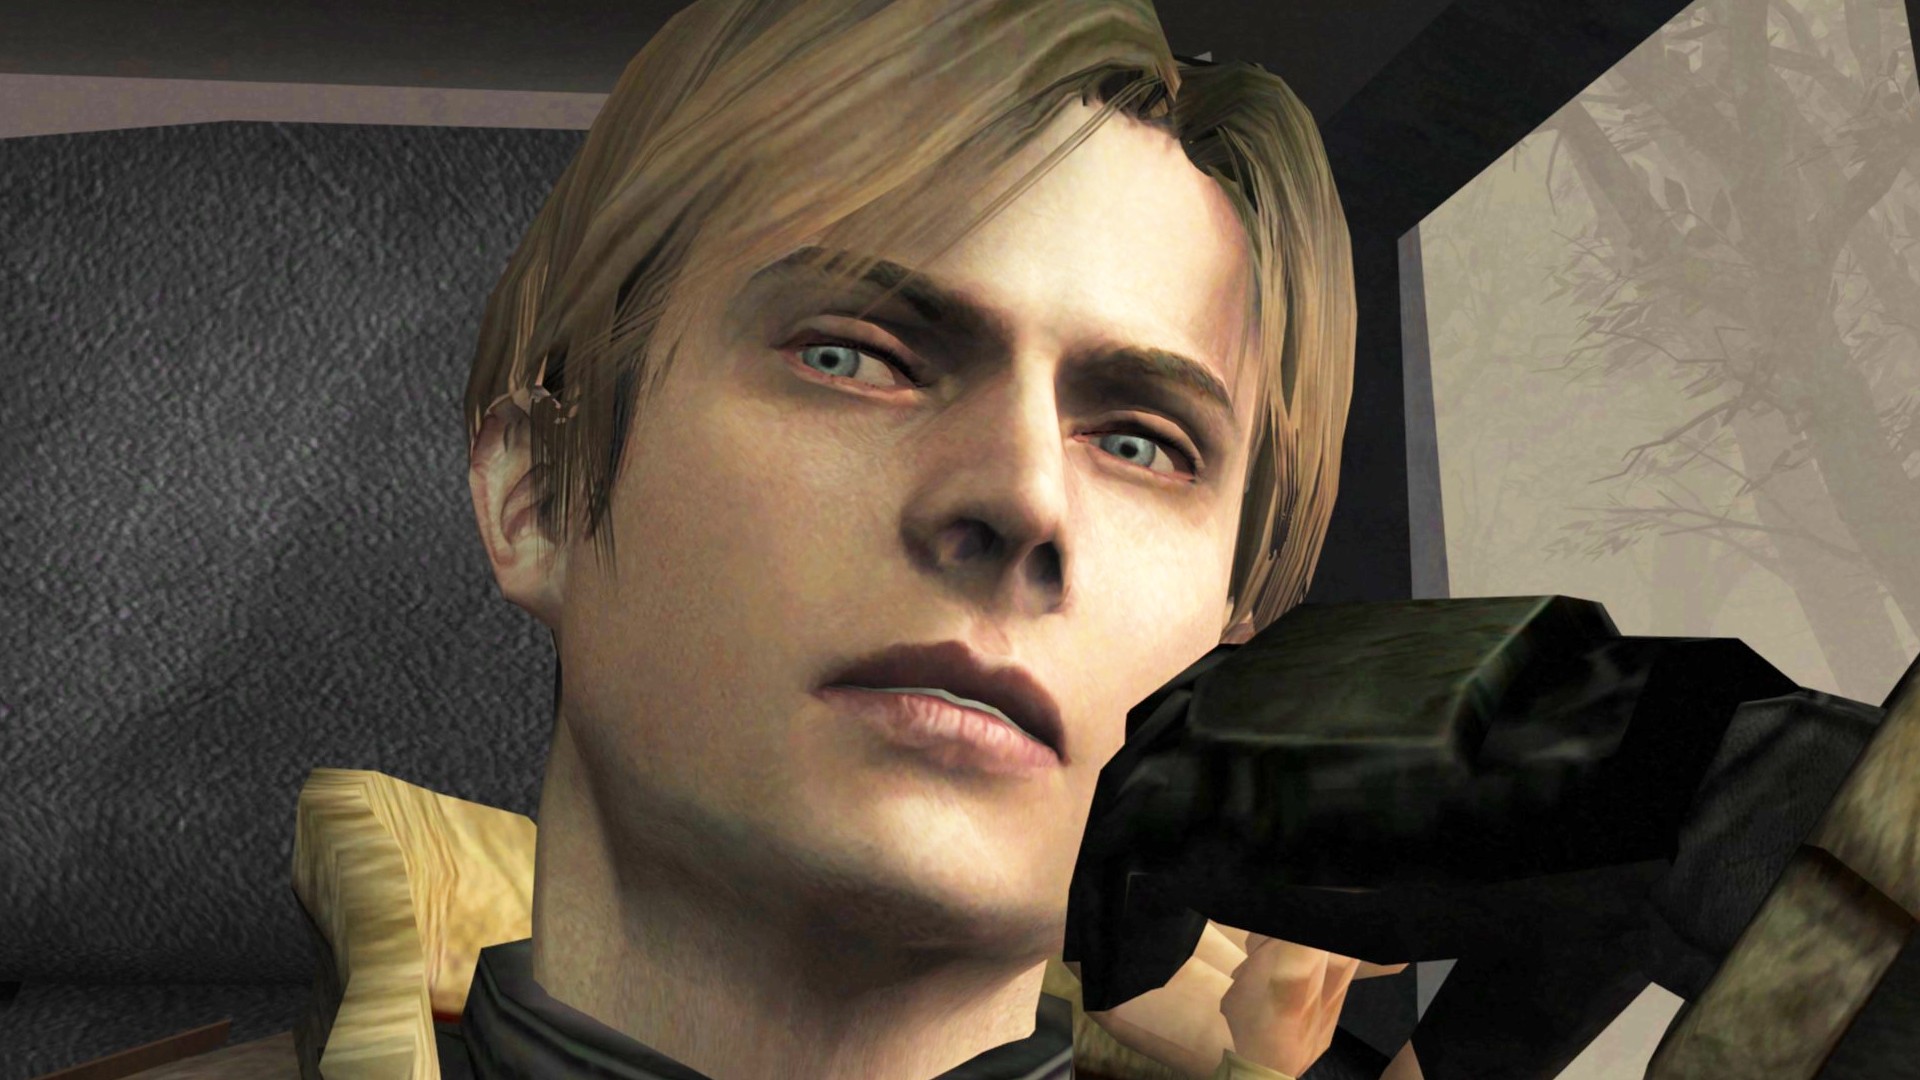 Resident Evil 4 Gets New Gameplay Footage, Releasing Demo Soon